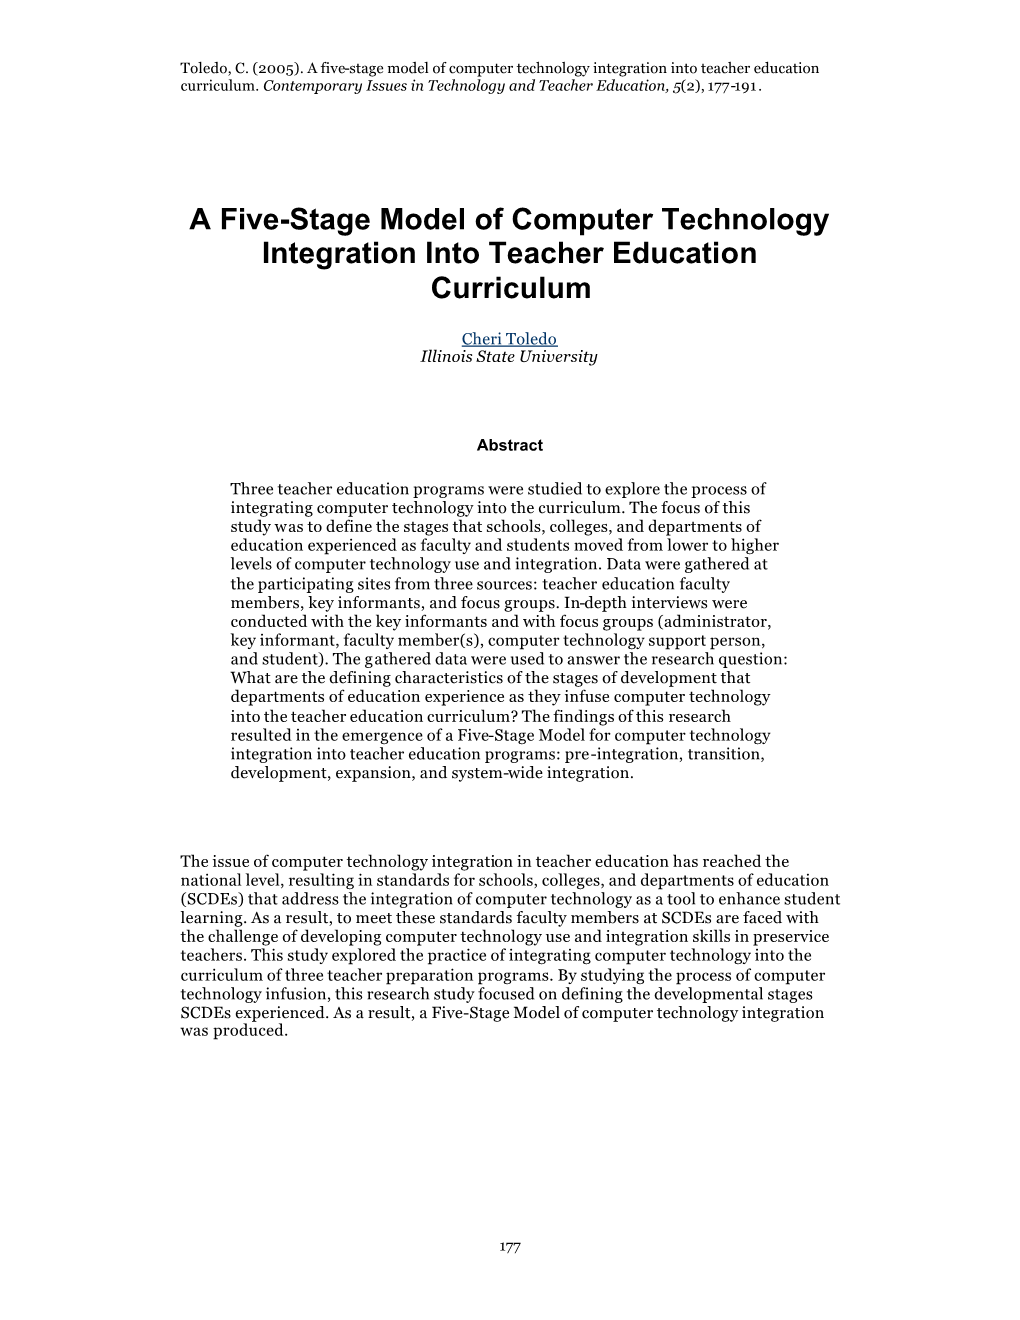 A Five-Stage Model of Computer Technology Integration Into Teacher Education Curriculum